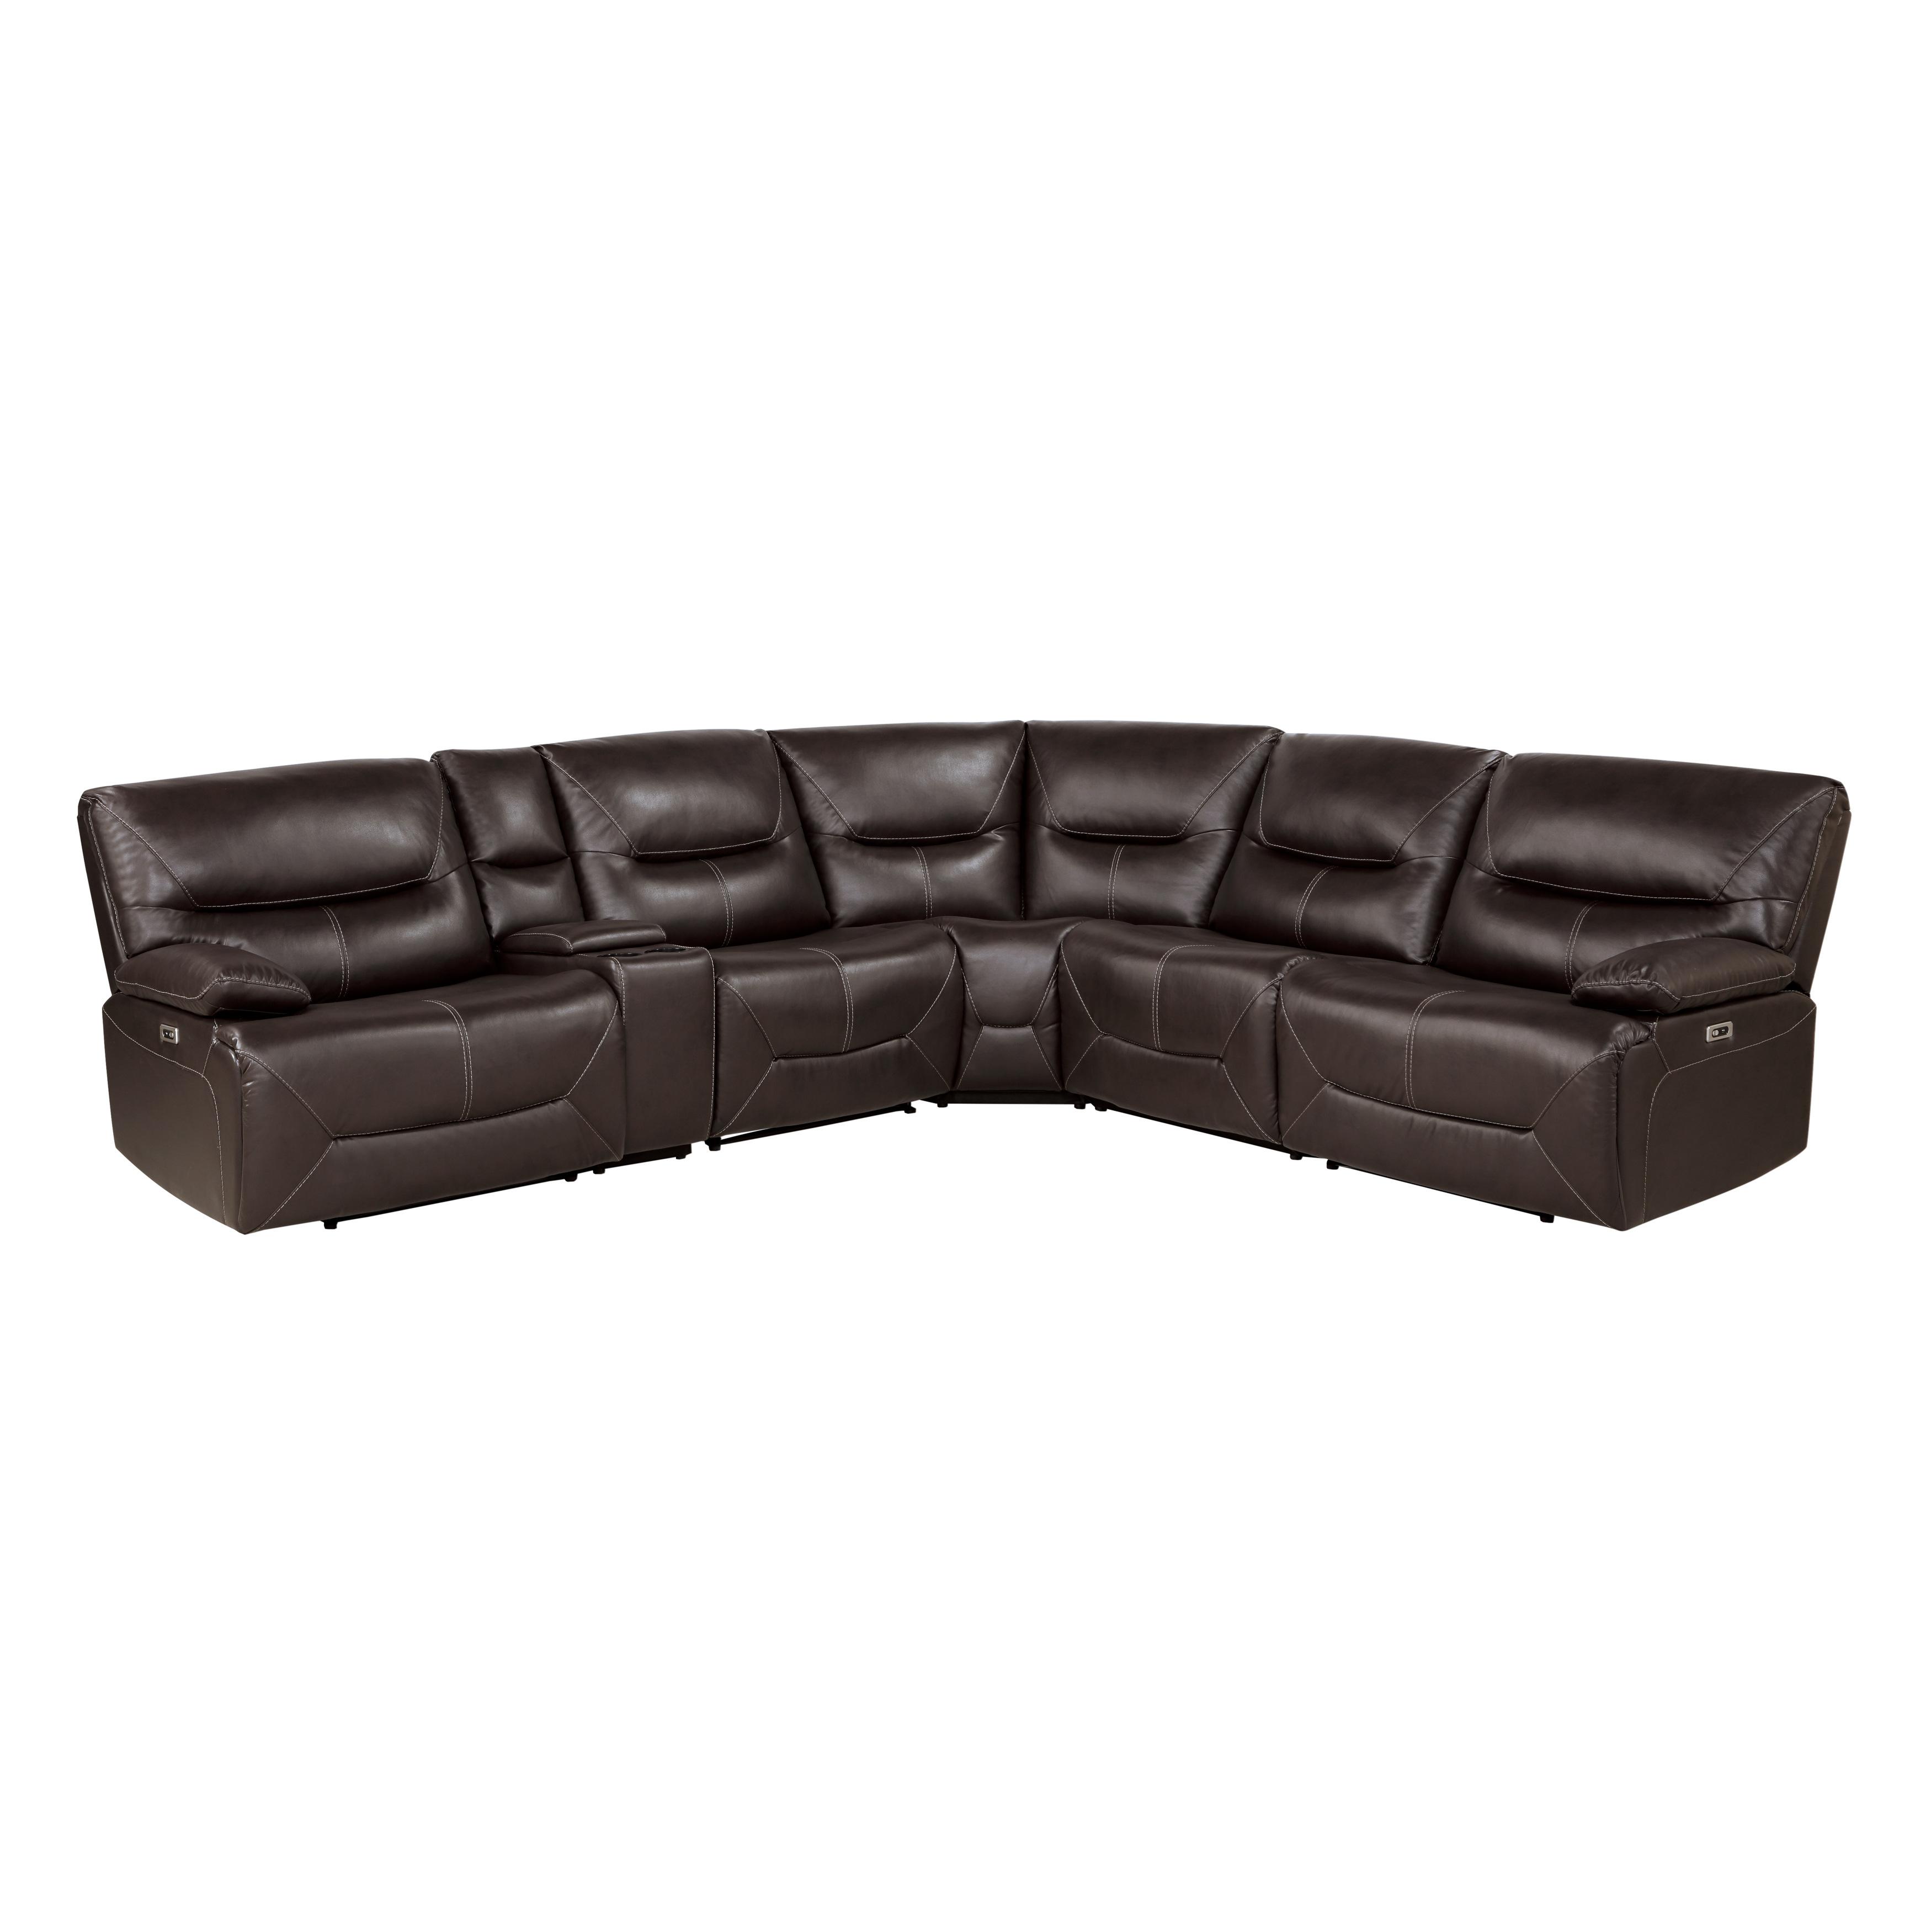 Transitional Power Reclining Sectional 9579BRW*6LRRRPW Dyersburg 9579BRW*6LRRRPW in Brown Faux Leather